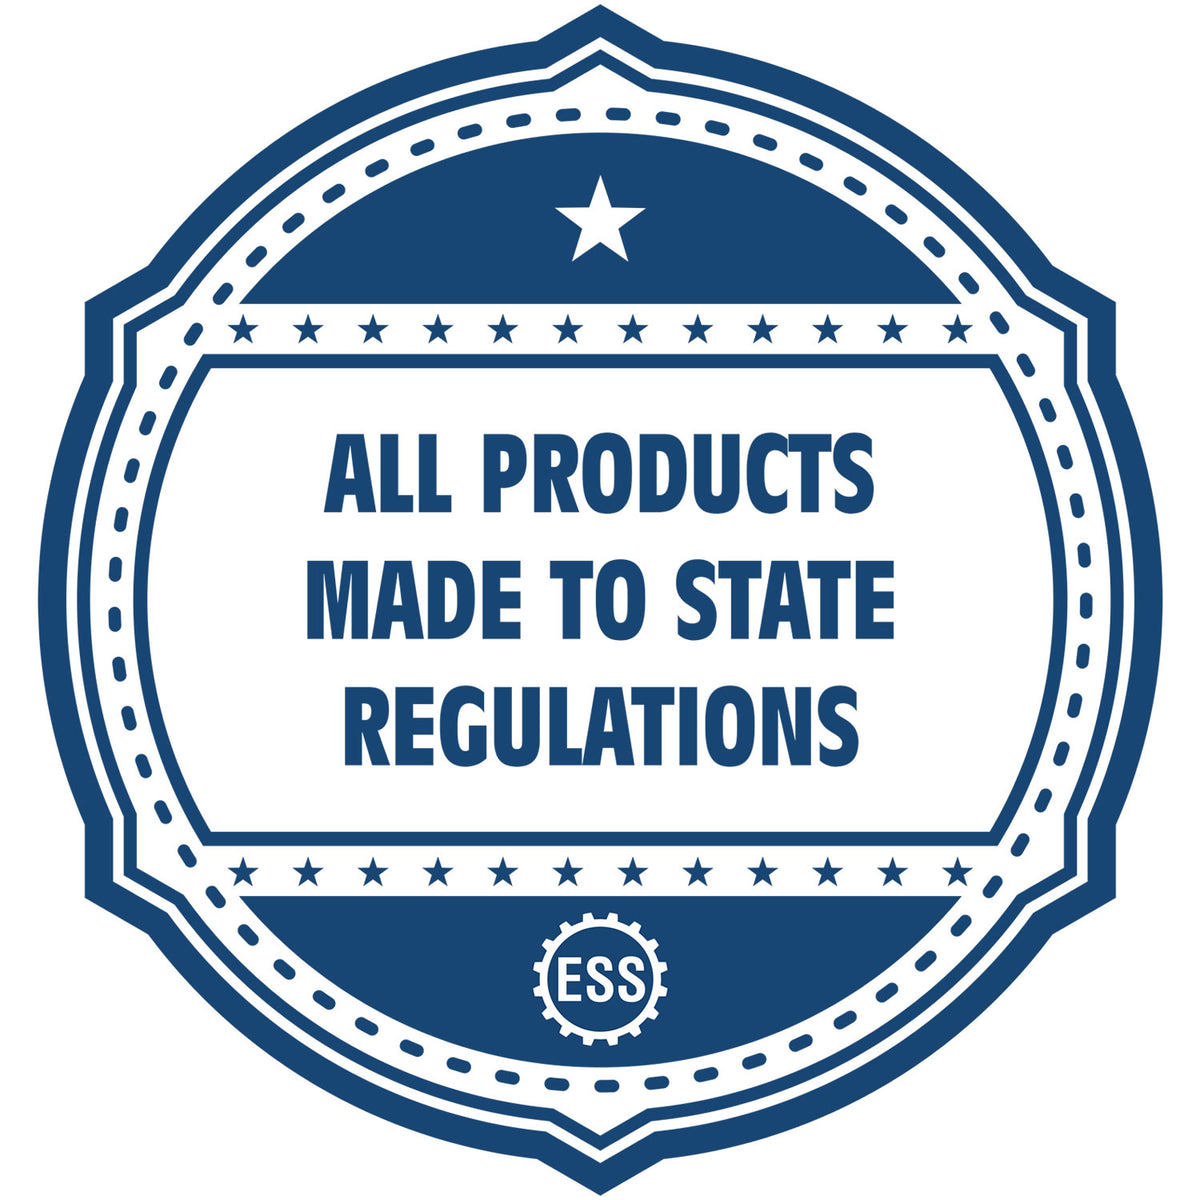 An icon or badge element for the Slim Pre-Inked Minnesota Architect Seal Stamp showing that this product is made in compliance with state regulations.